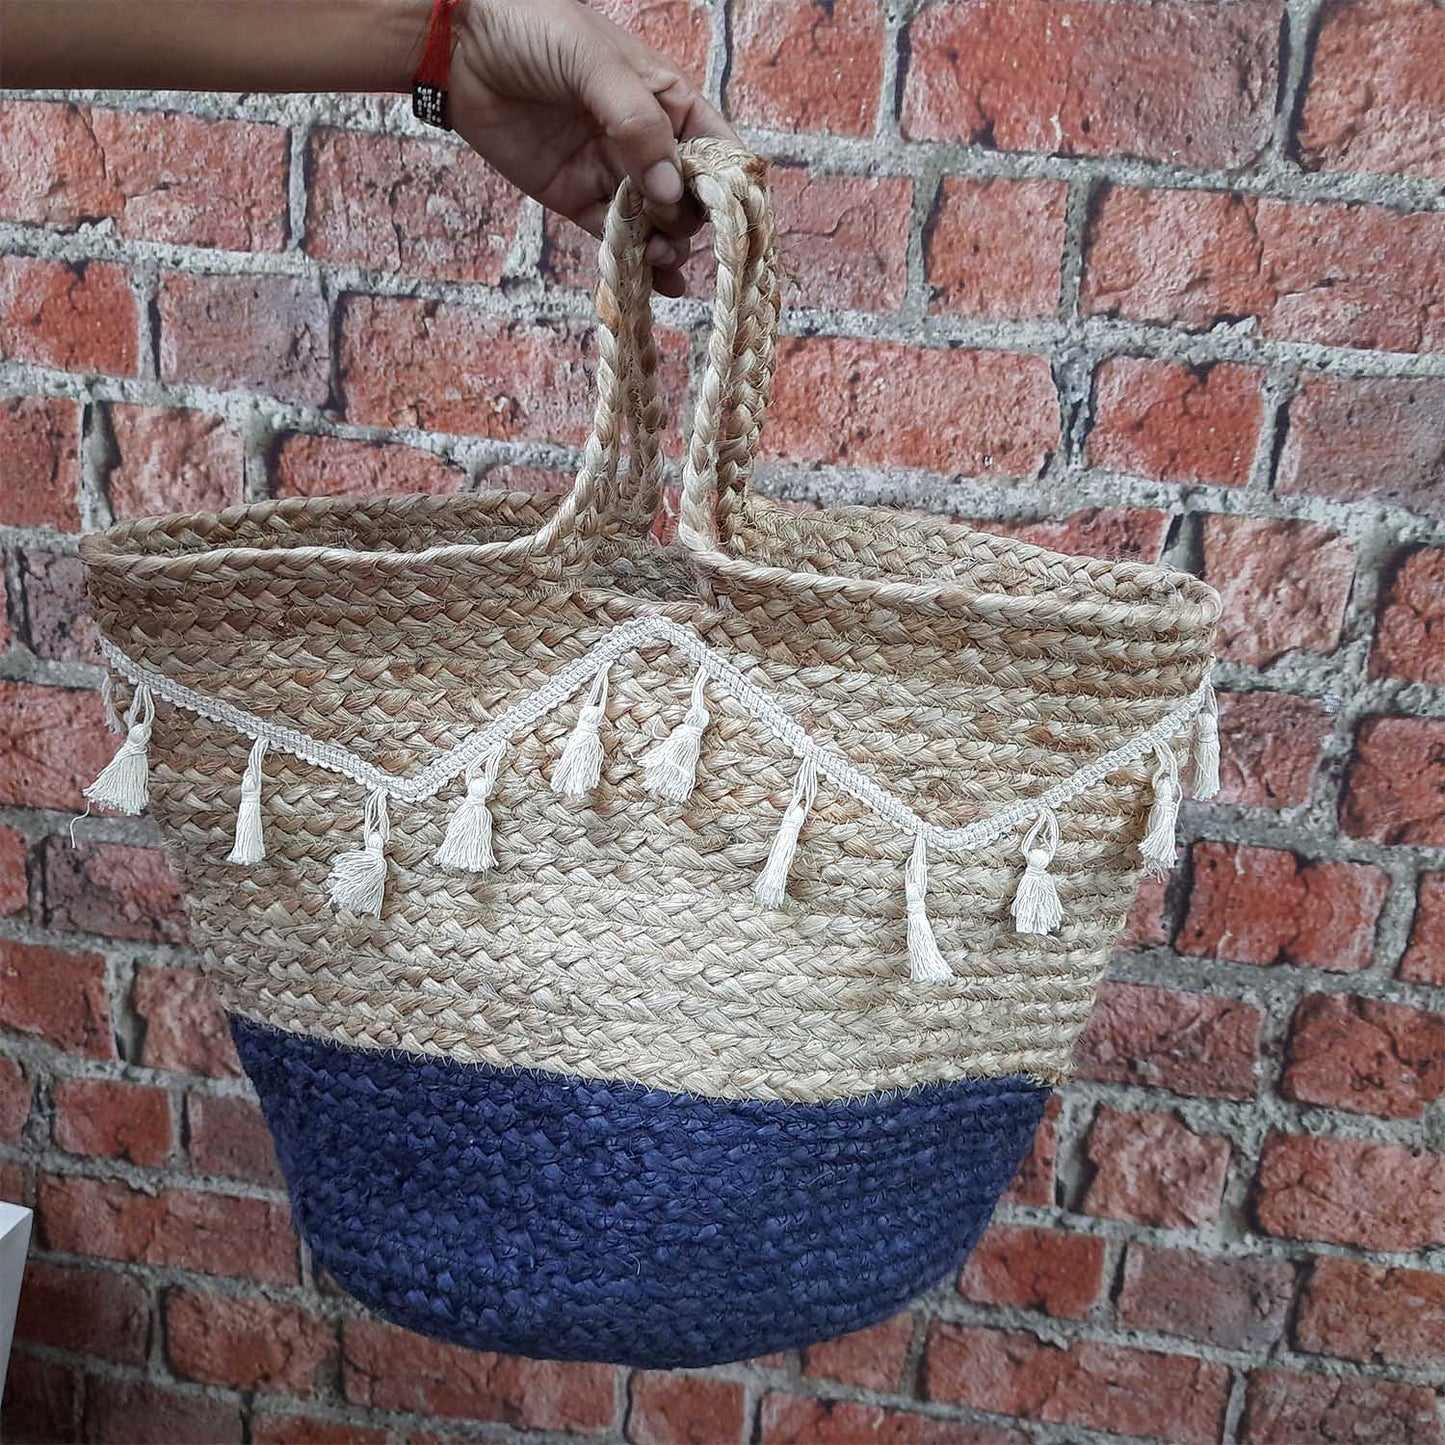 Avioni Home- Hand Braided Natural Jute Baskets With Blue Hand Decorated with Fringes Large Size- 12×12 inch (31×31 cms)